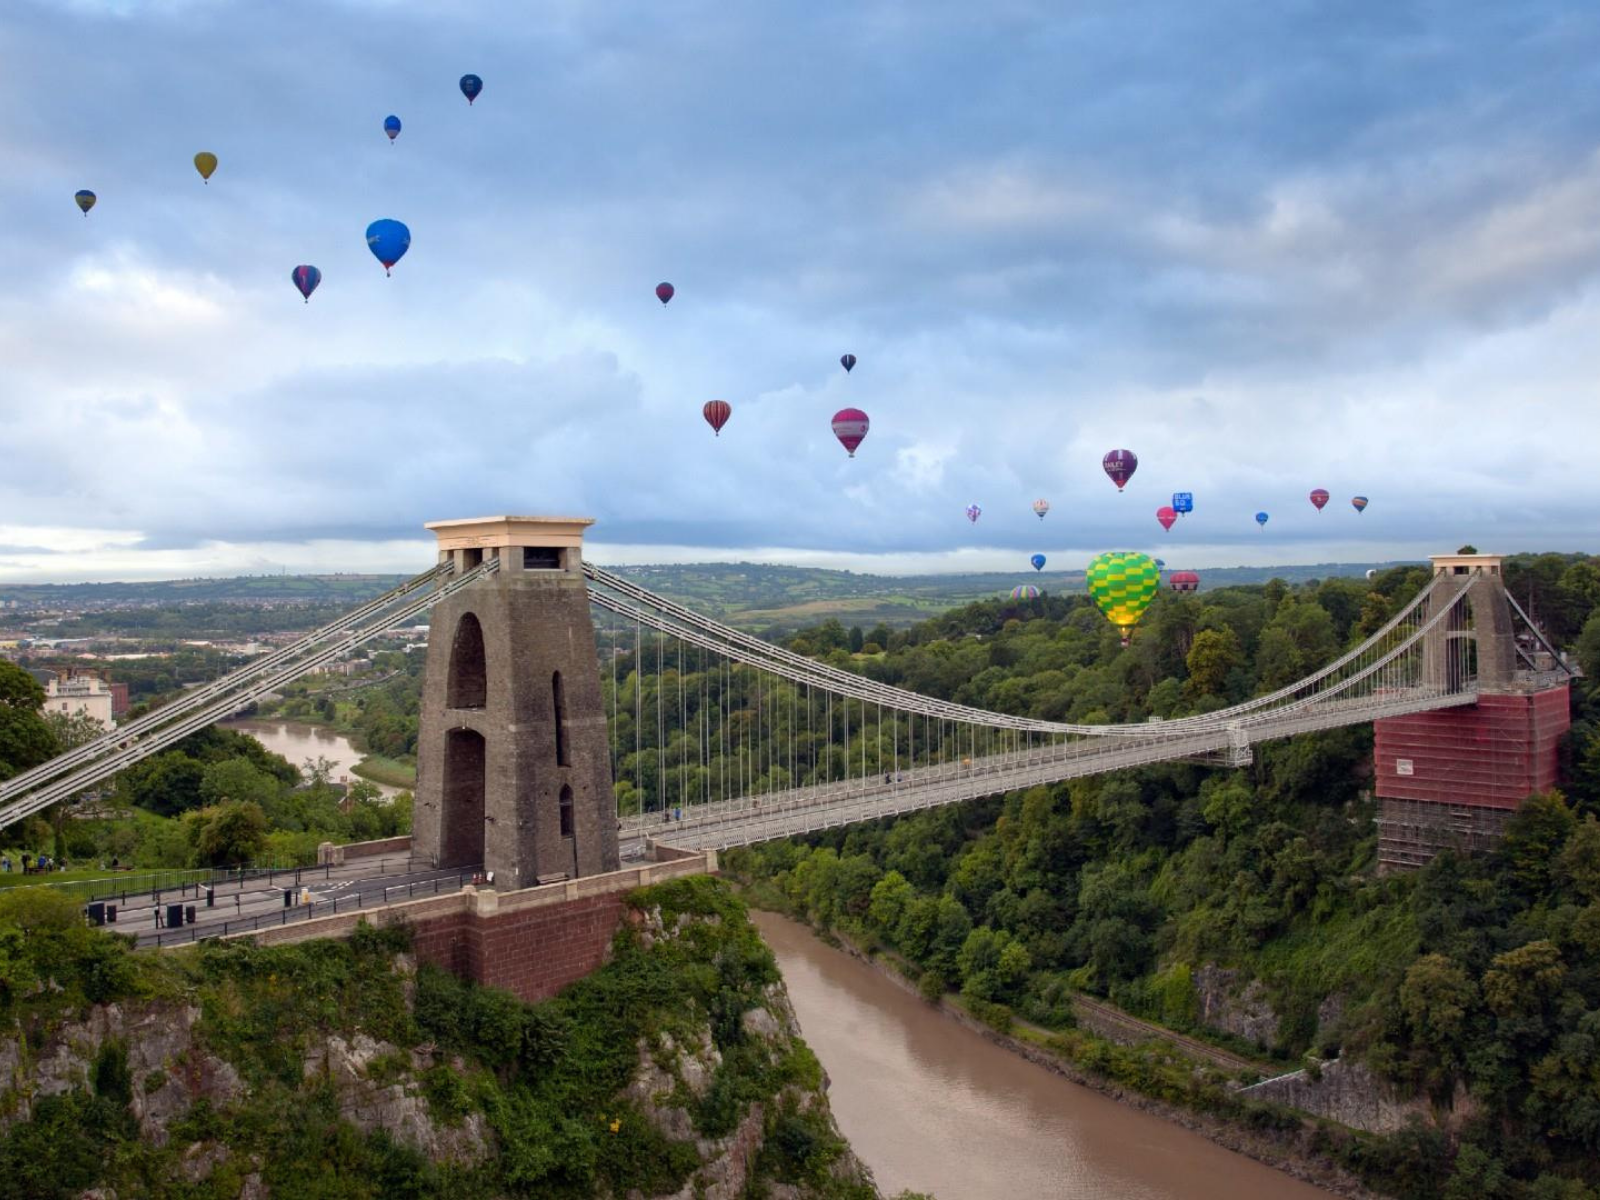 Best things to do in Bath UK - AJ Saunders - Balloons over Clifton Suspension Bridge by Gary Newman - Visit Bath